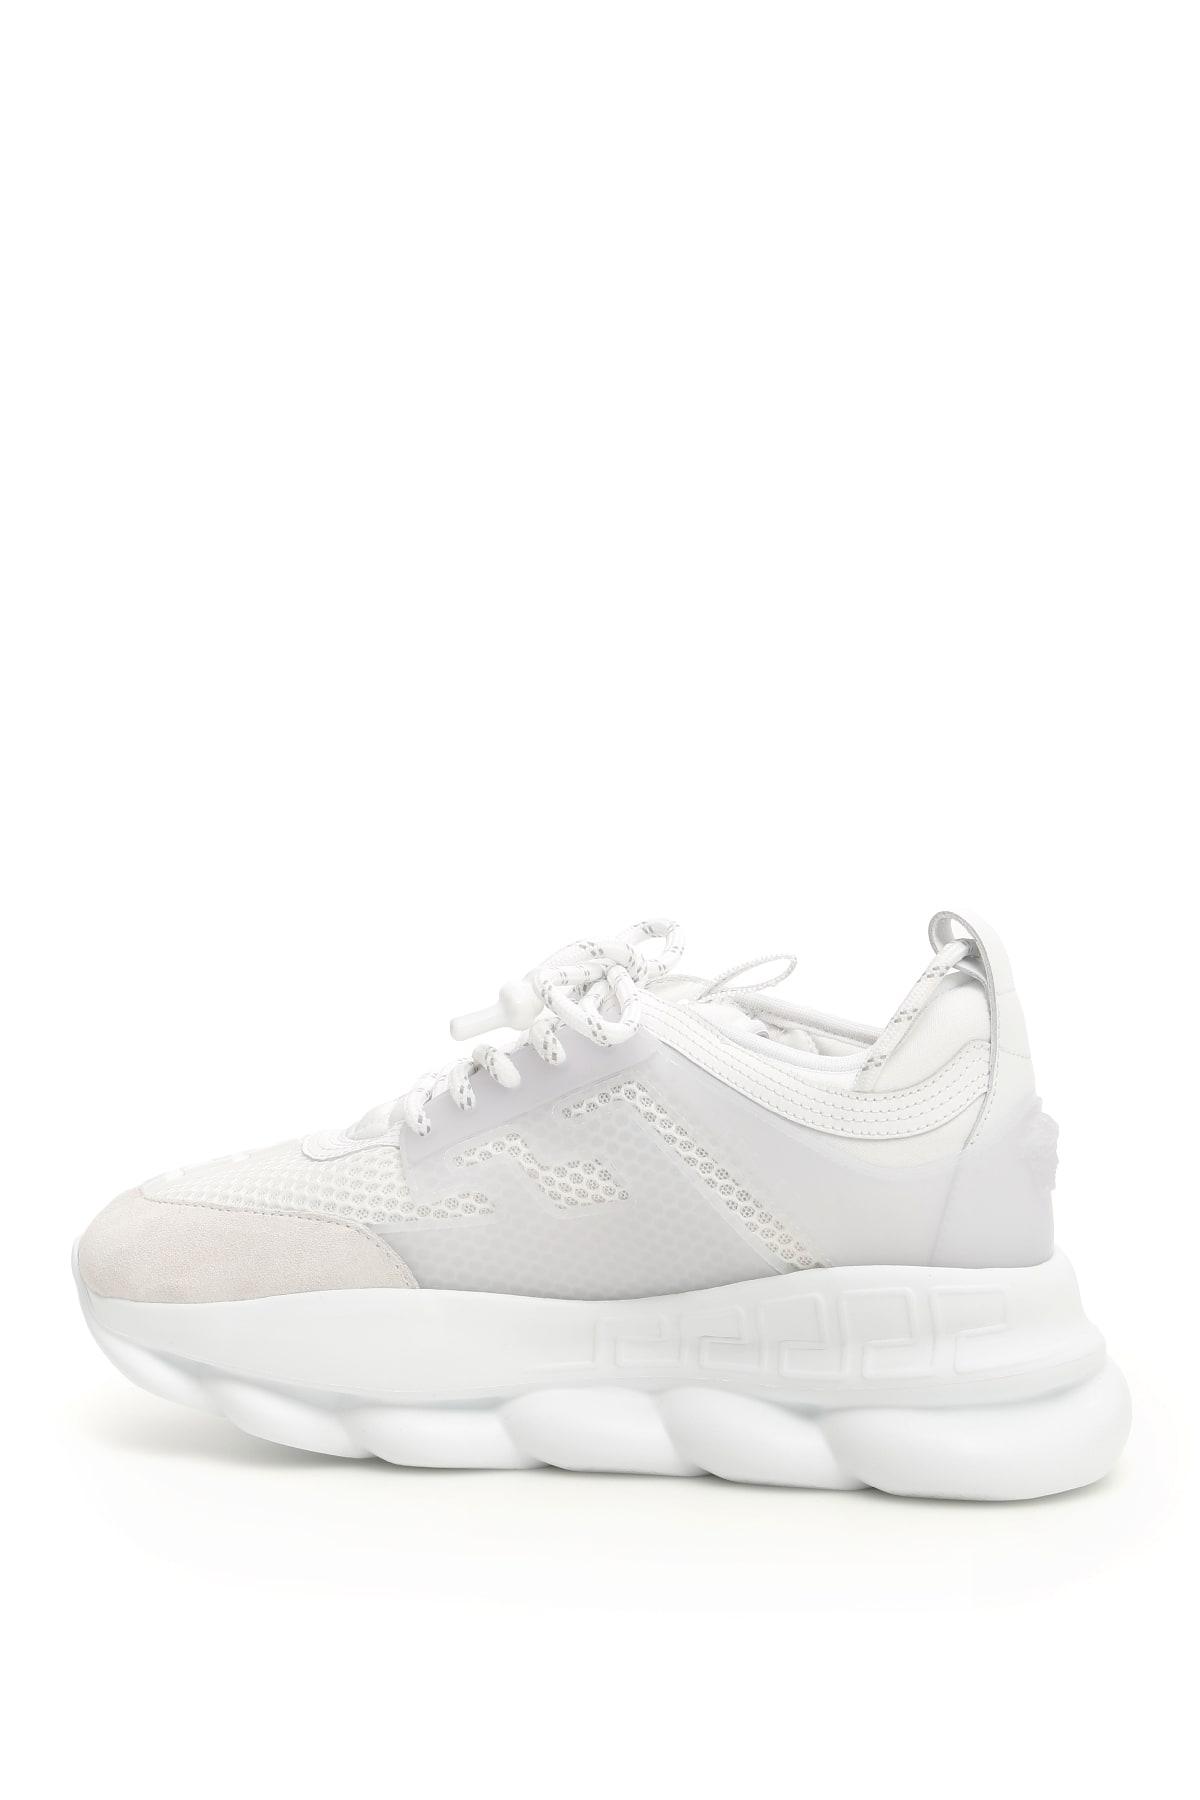 Versace Chain Reaction Sneakers in White | Lyst